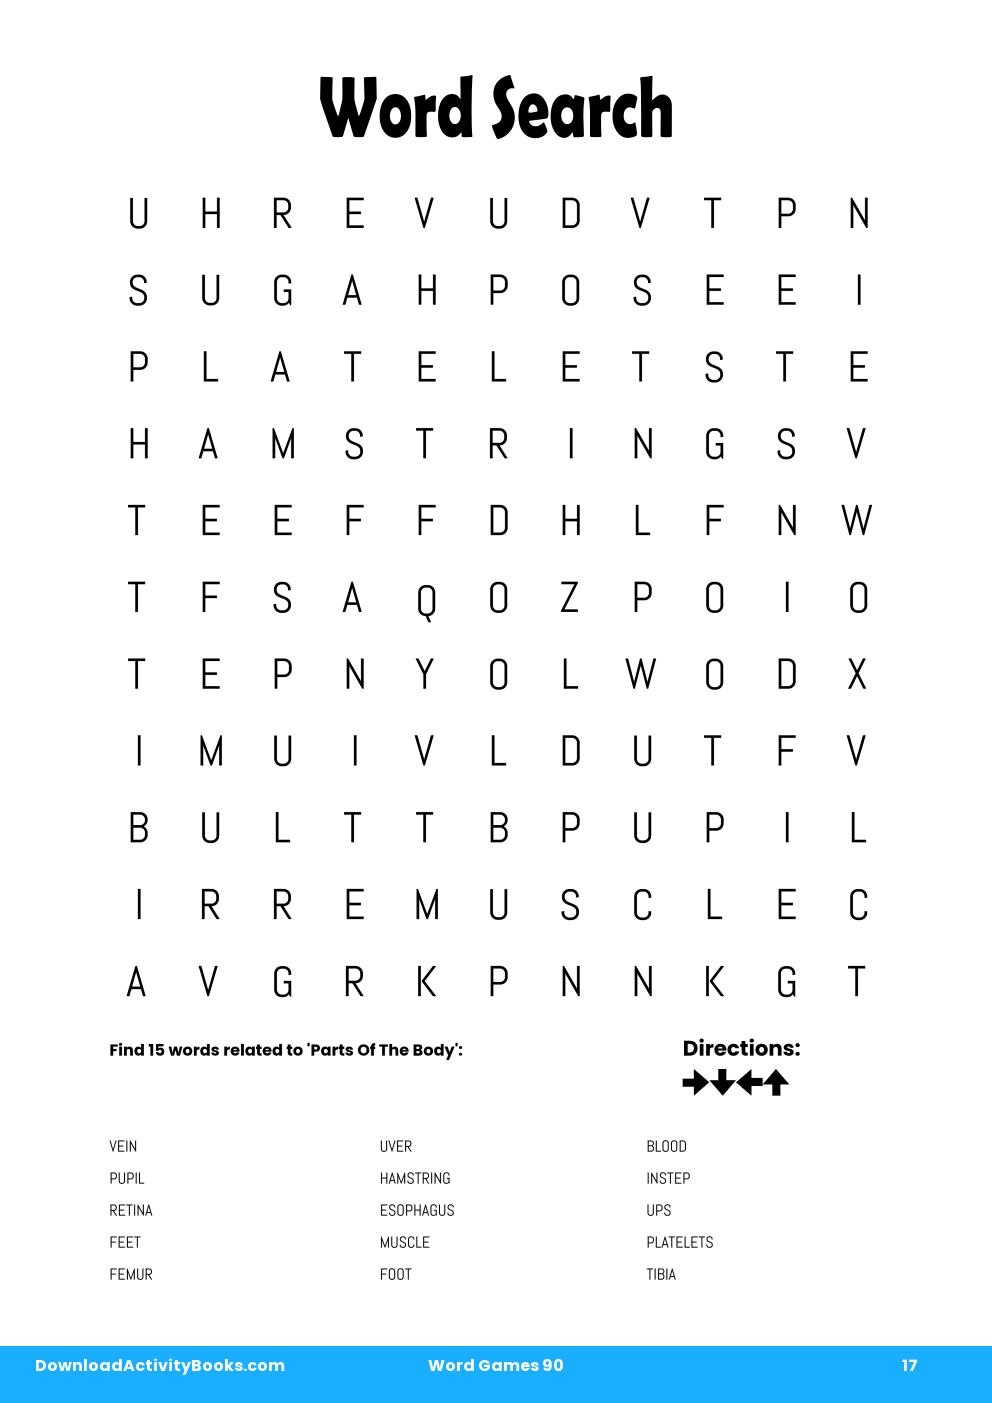 Word Search in Word Games 90